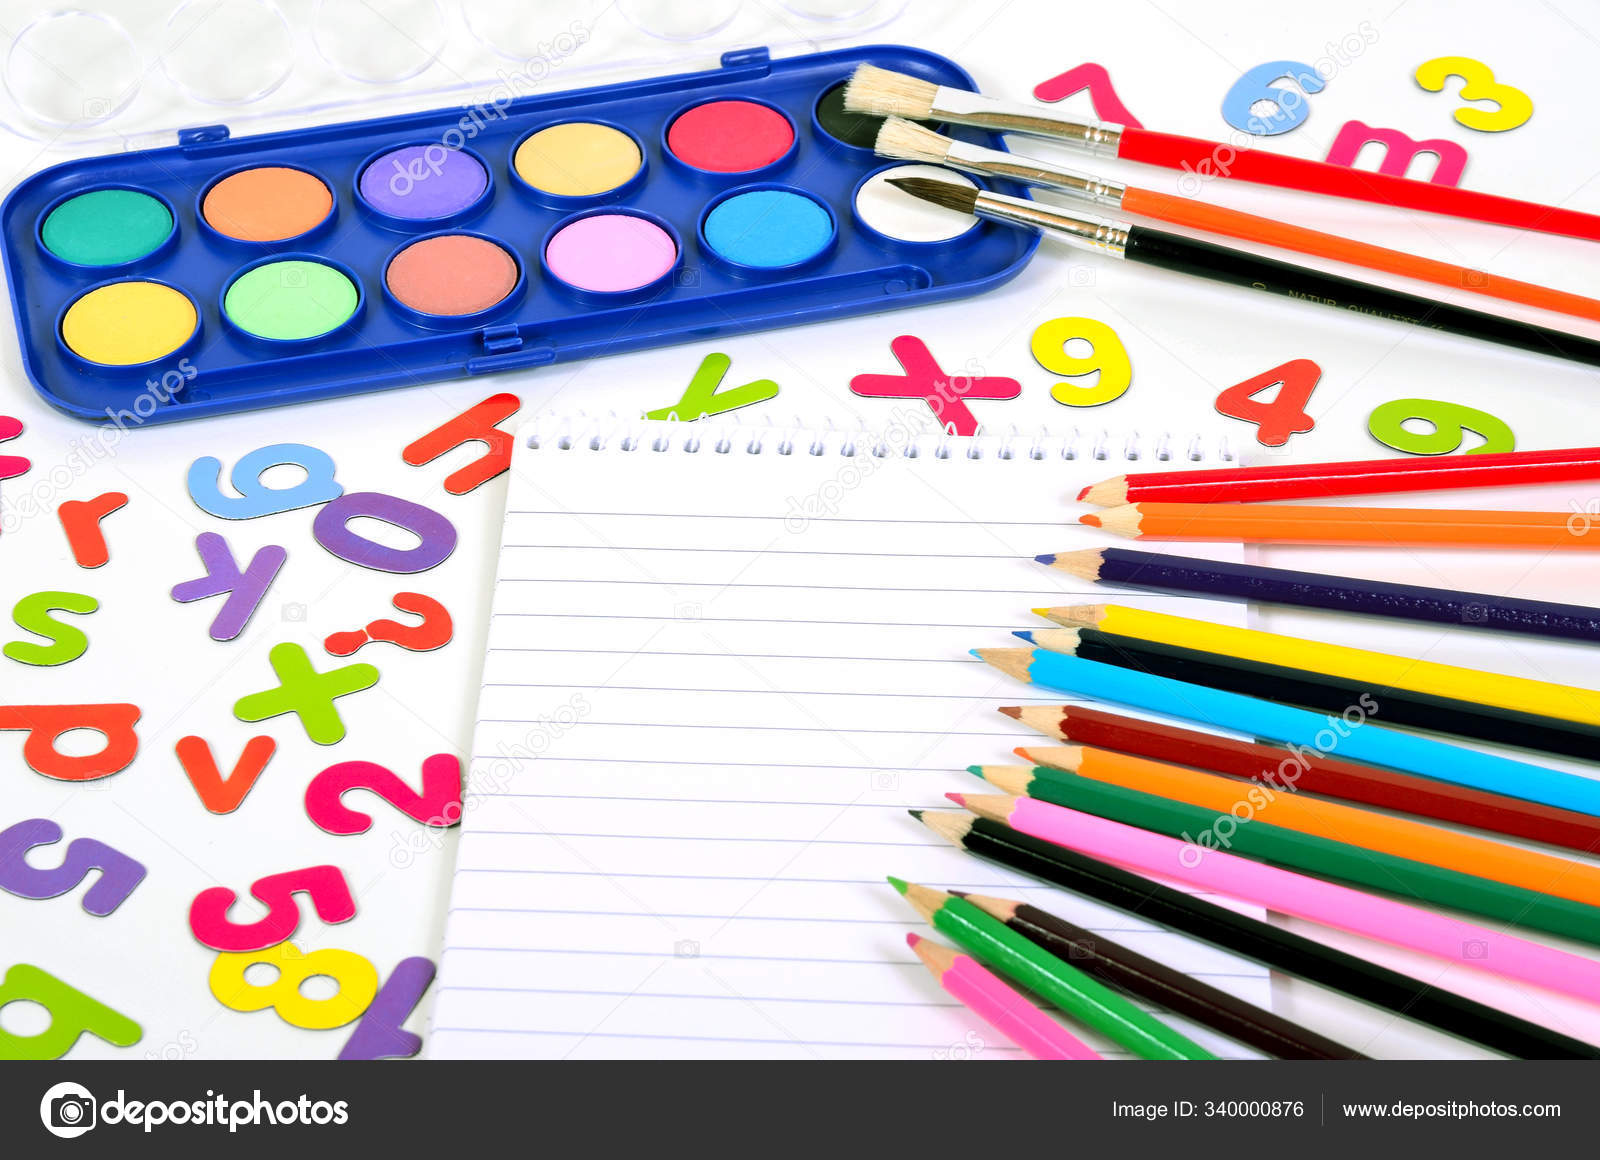 School Brush Pens Colorful Letters Numbers Stock Photo by